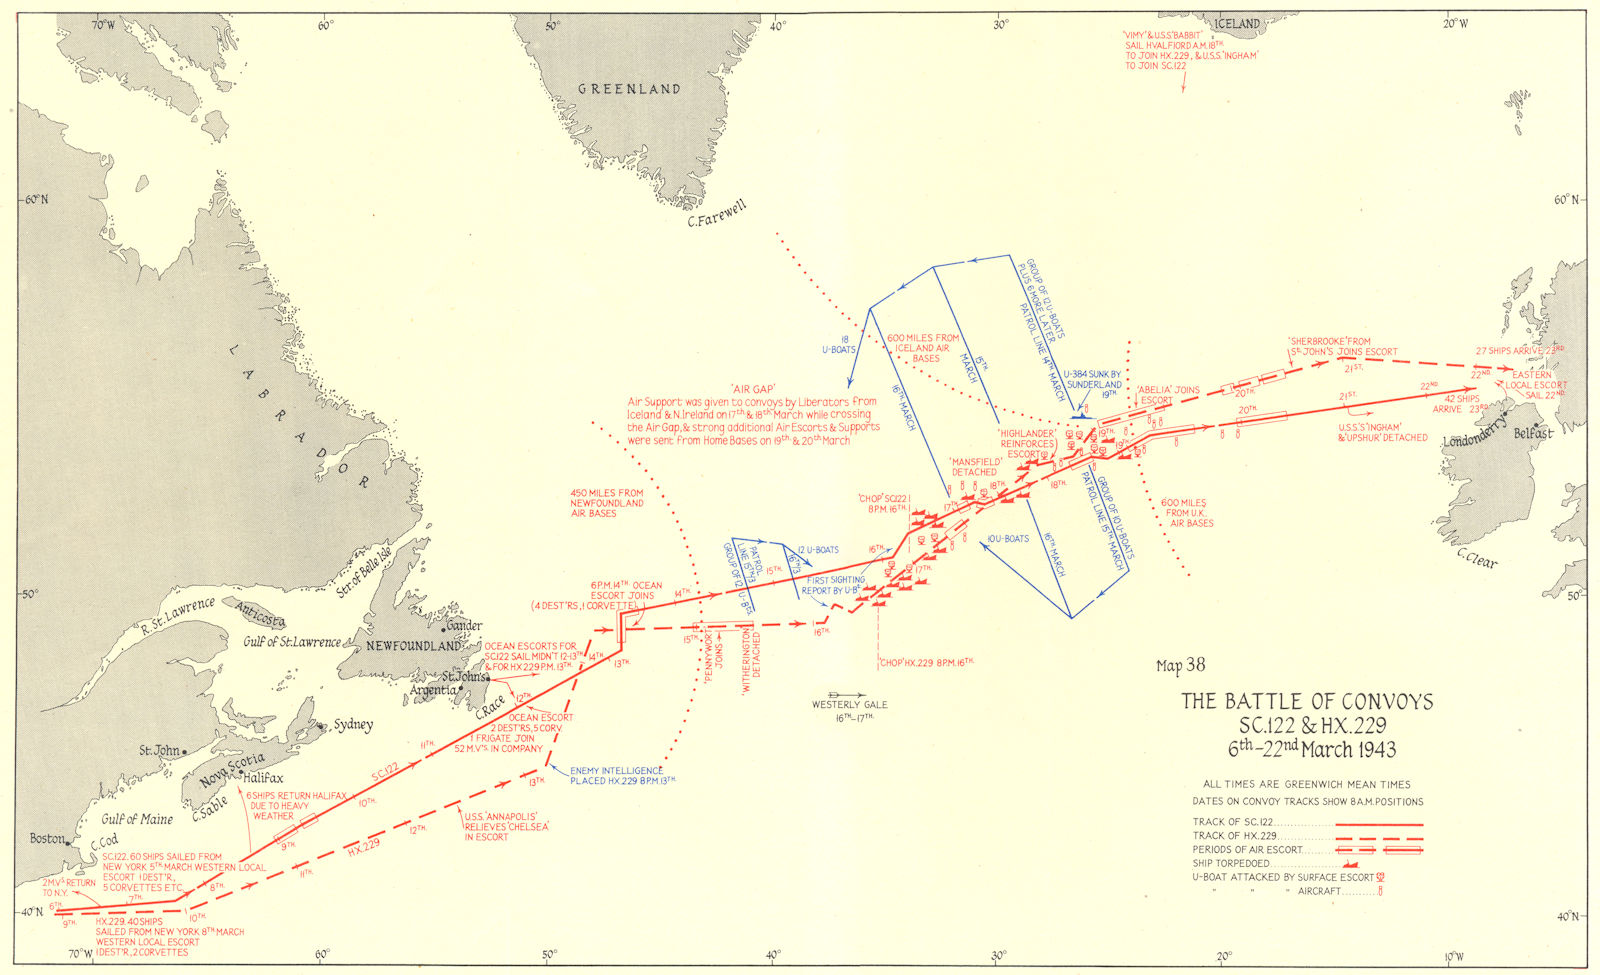 BATTLE OF THE ATLANTIC. Convoys SC 122 & HX 229 6th-22nd March 1943 1956 map